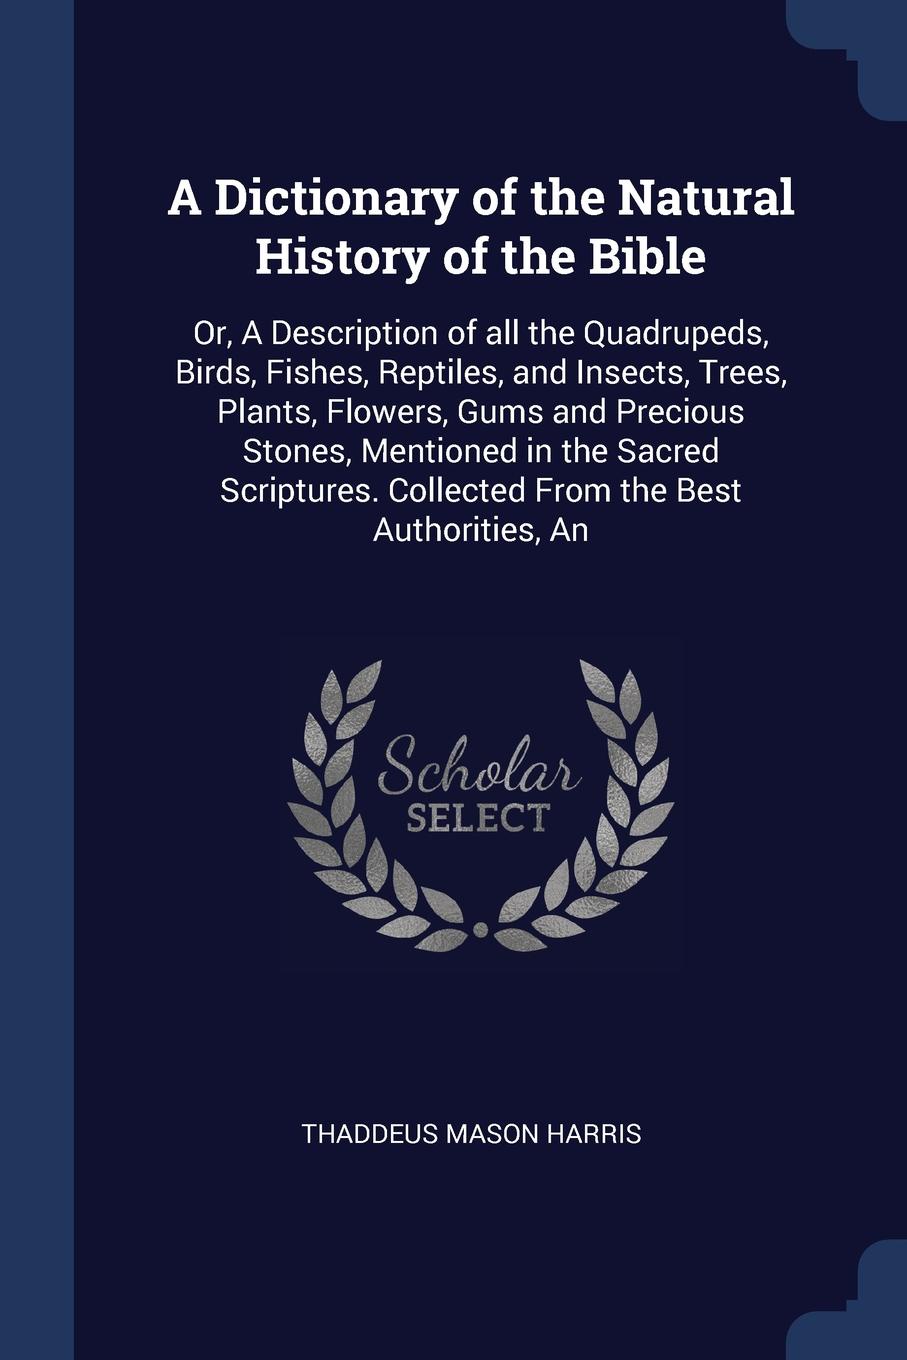 A Dictionary of the Natural History of the Bible. Or, A Description of all the Quadrupeds, Birds, Fishes, Reptiles, and Insects, Trees, Plants, Flowers, Gums and Precious Stones, Mentioned in the Sacred Scriptures. Collected From the Best Authorit...